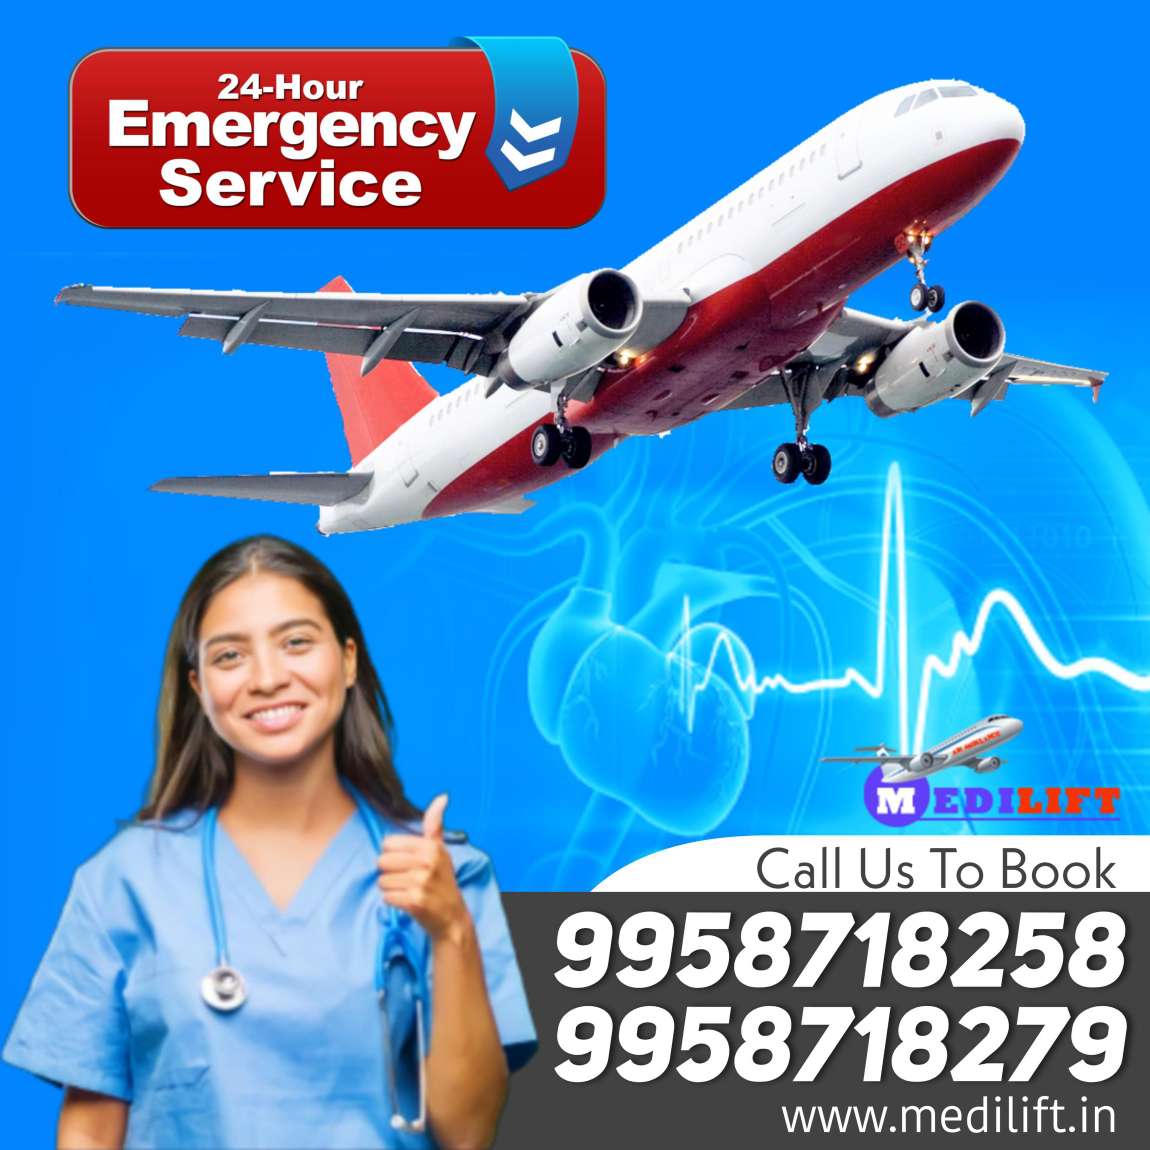 Utilize the Top Class Air Ambulance Service in Chennai from Medilift